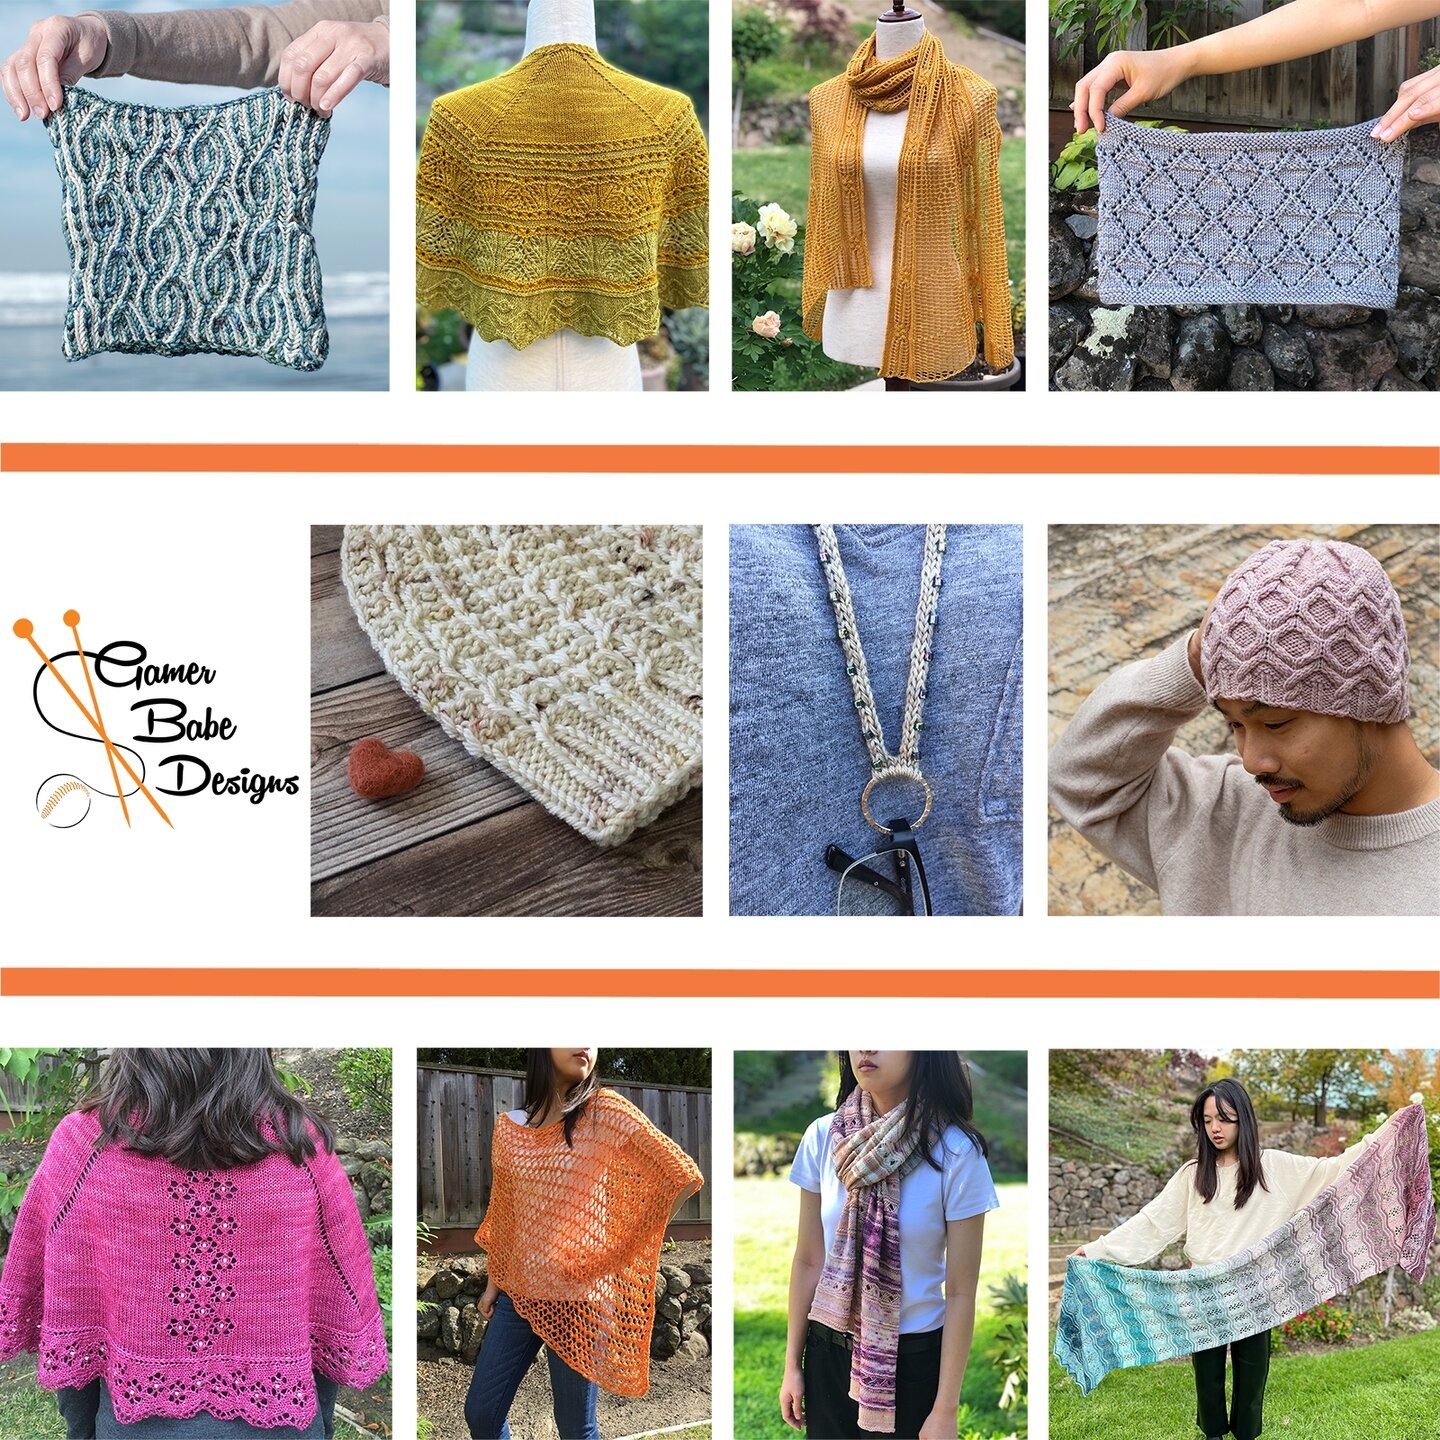 It's time for the @indiegiftalong! Thank you to the Indie Gift-A-Long organizers for all the work they put into making this event possible 🧡!

🧶The #IndieGiftAlong is a celebration of independent knit and crochet designers. Be sure to check out all